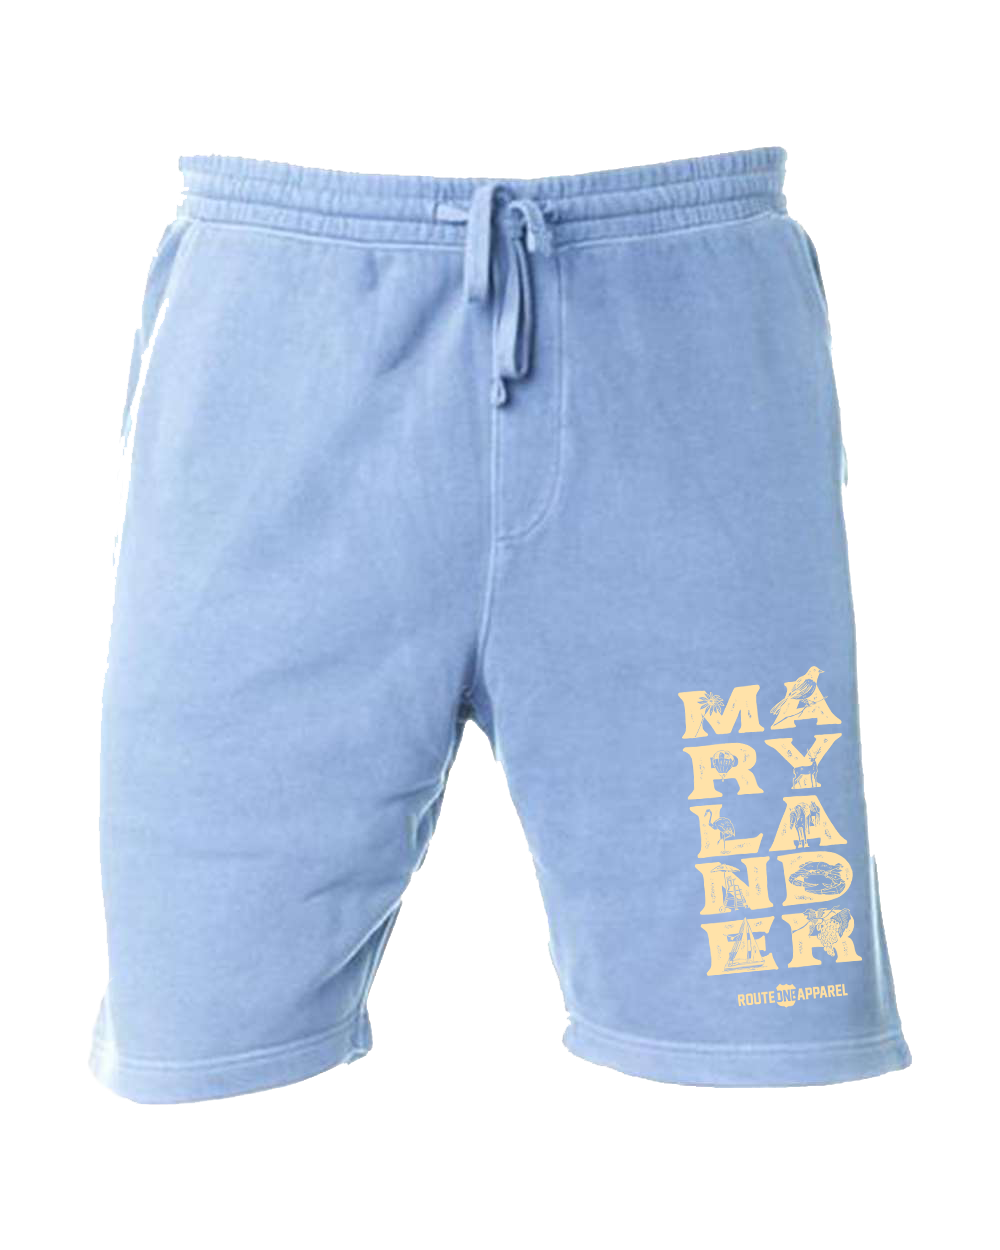 Marylander Stacked (Light Blue) / Sweatshorts - Route One Apparel